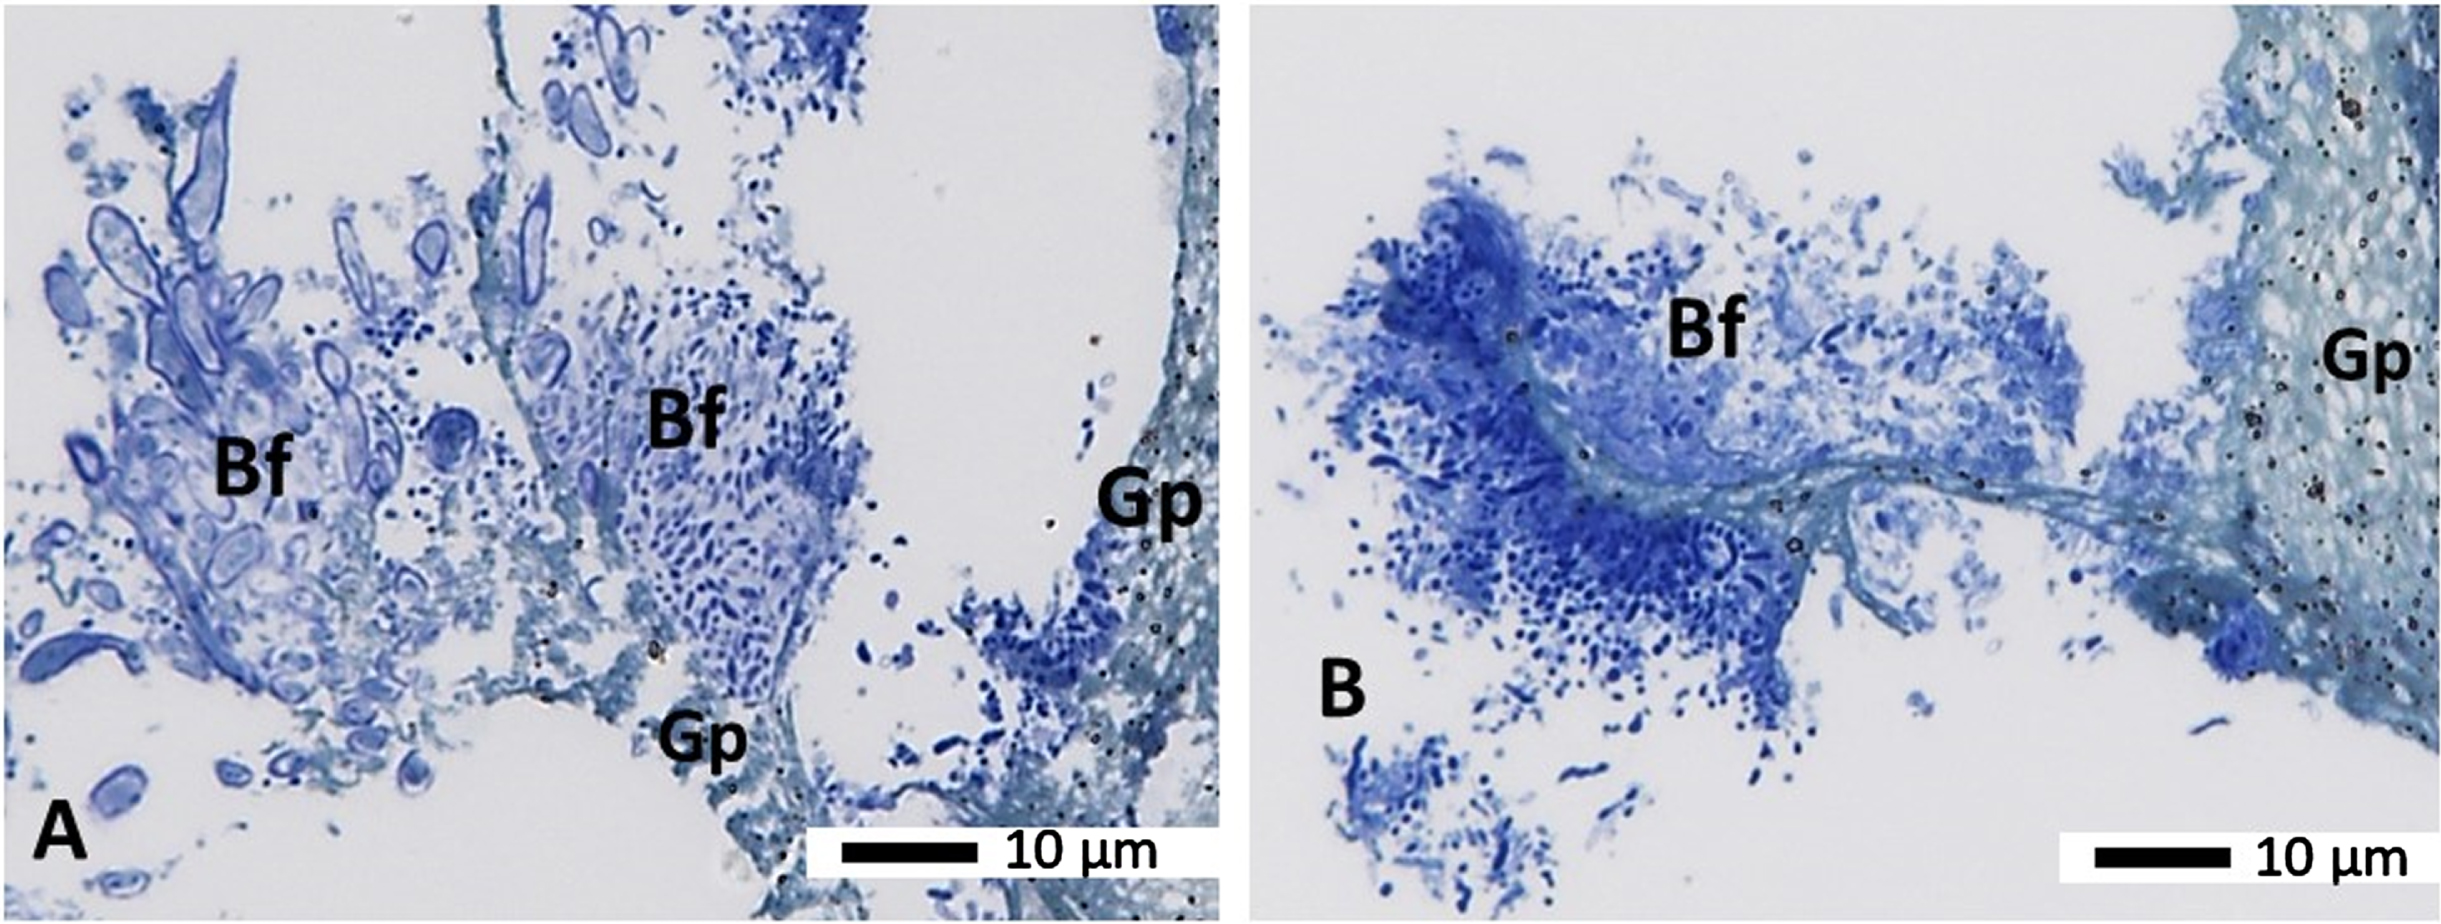 Semithin sections from a gutta percha from a failed root treatment (secondary endodontic infection Group B) embedded in Araldite resin. Panels A and B show semi-thin sections stained with the morphology stain Toluidine blue showing the biofilm (Bf) on the gutta percha (Gp). A variety of microbes (stained blue) can be seen growing on and slightly away from the gutta percha (Gp), which has a green/blue/greyish shade with black dots in it. Magnification as per micron bar.